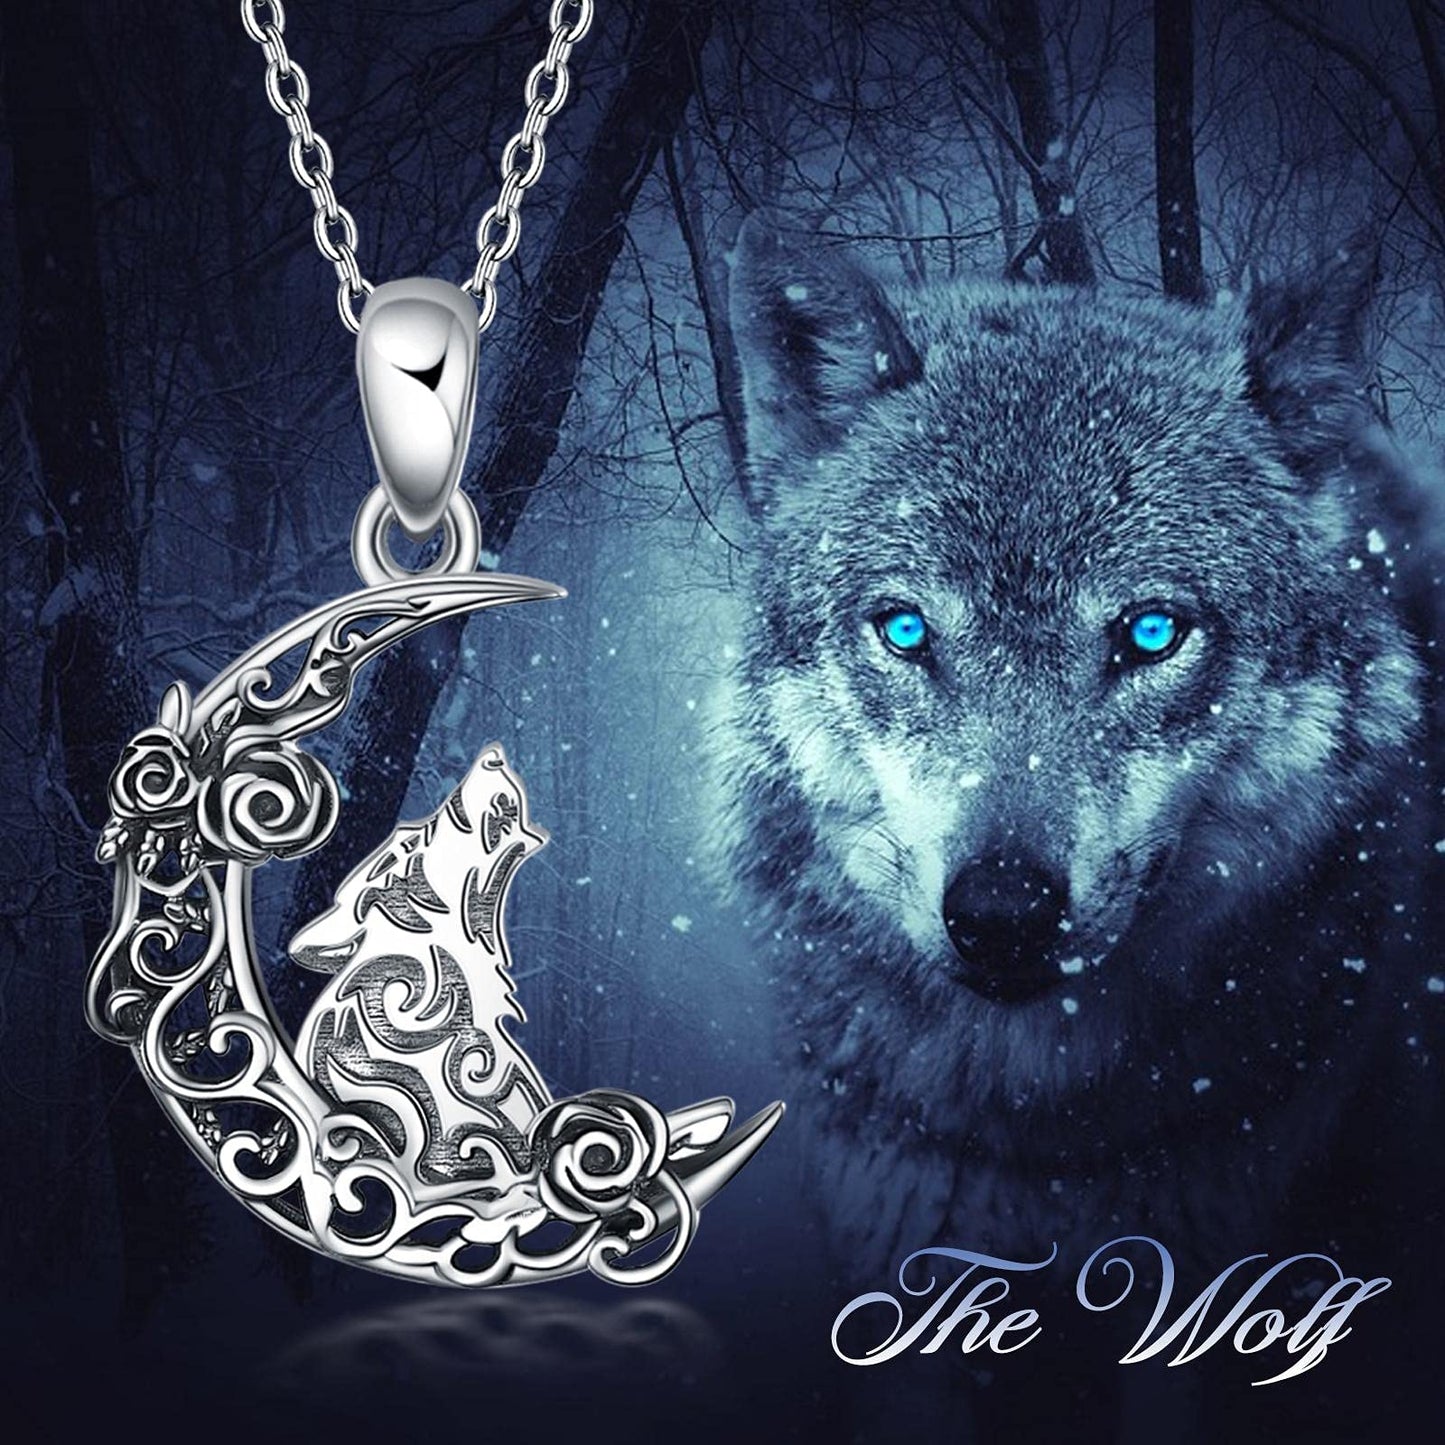 Celtic Knot Sterling Silver Animal Pendant Necklace - Raven/Wolf/Dog/Hummingbird/Dragon - Irish Lucky Jewelry Gift for Women and Girls.